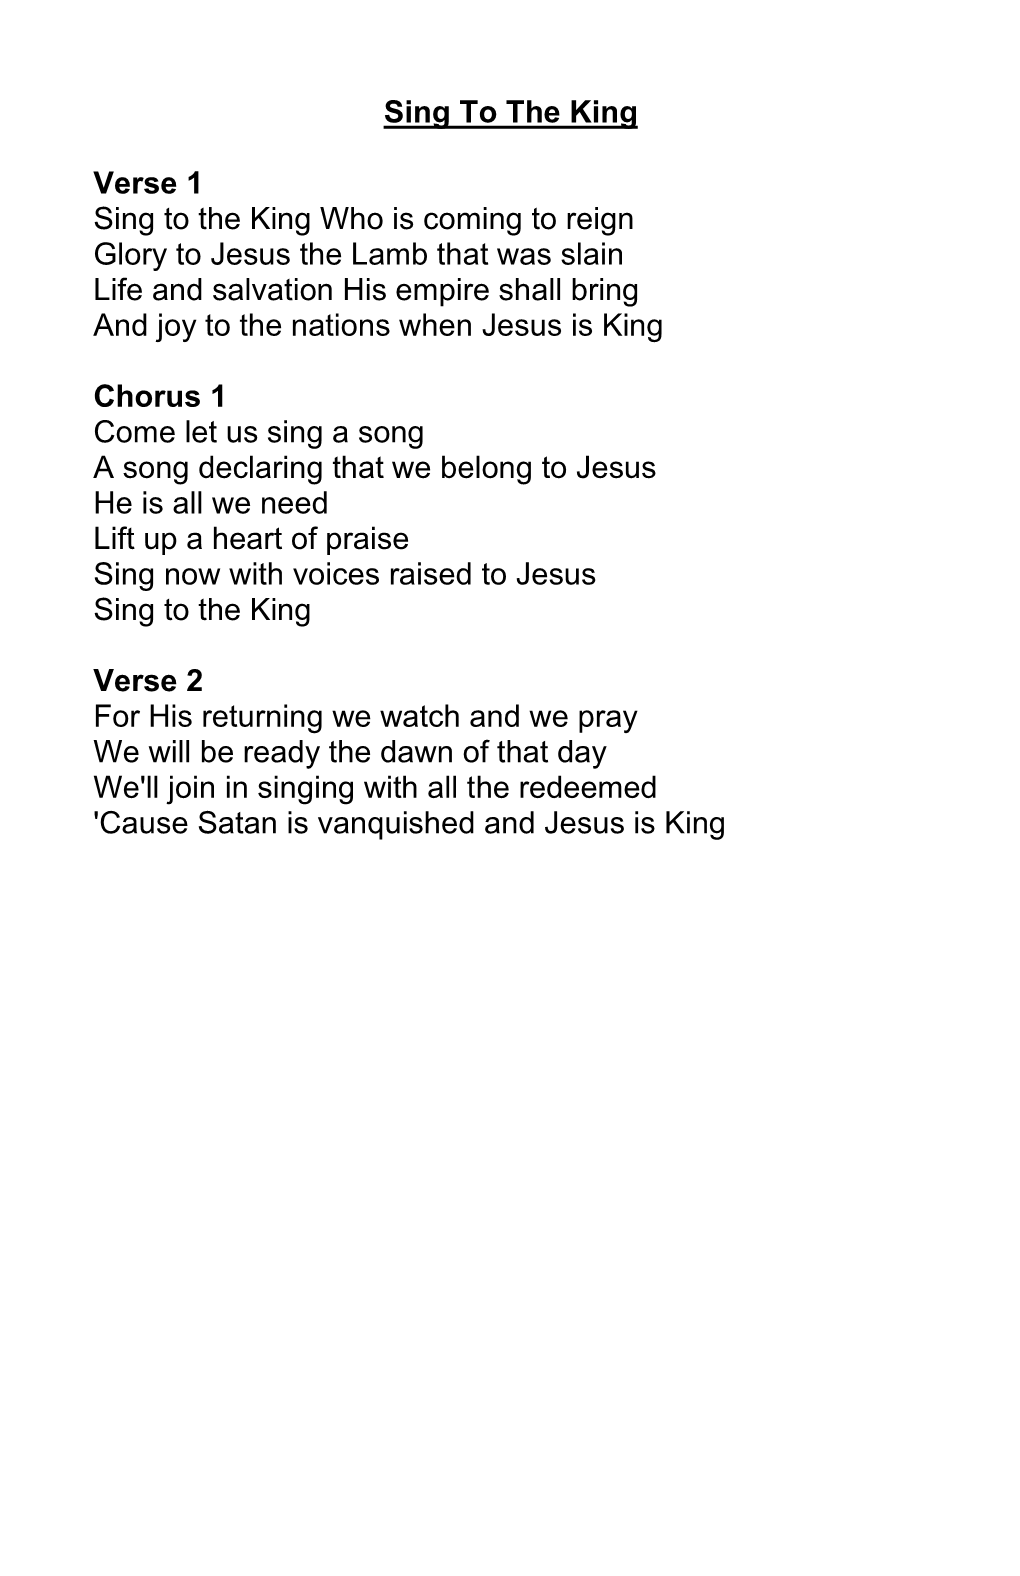 Sing to the King Verse 1 Sing to the King Who Is Coming to Reign Glory to Jesus the Lamb That Was Slain Life and Salvation His E